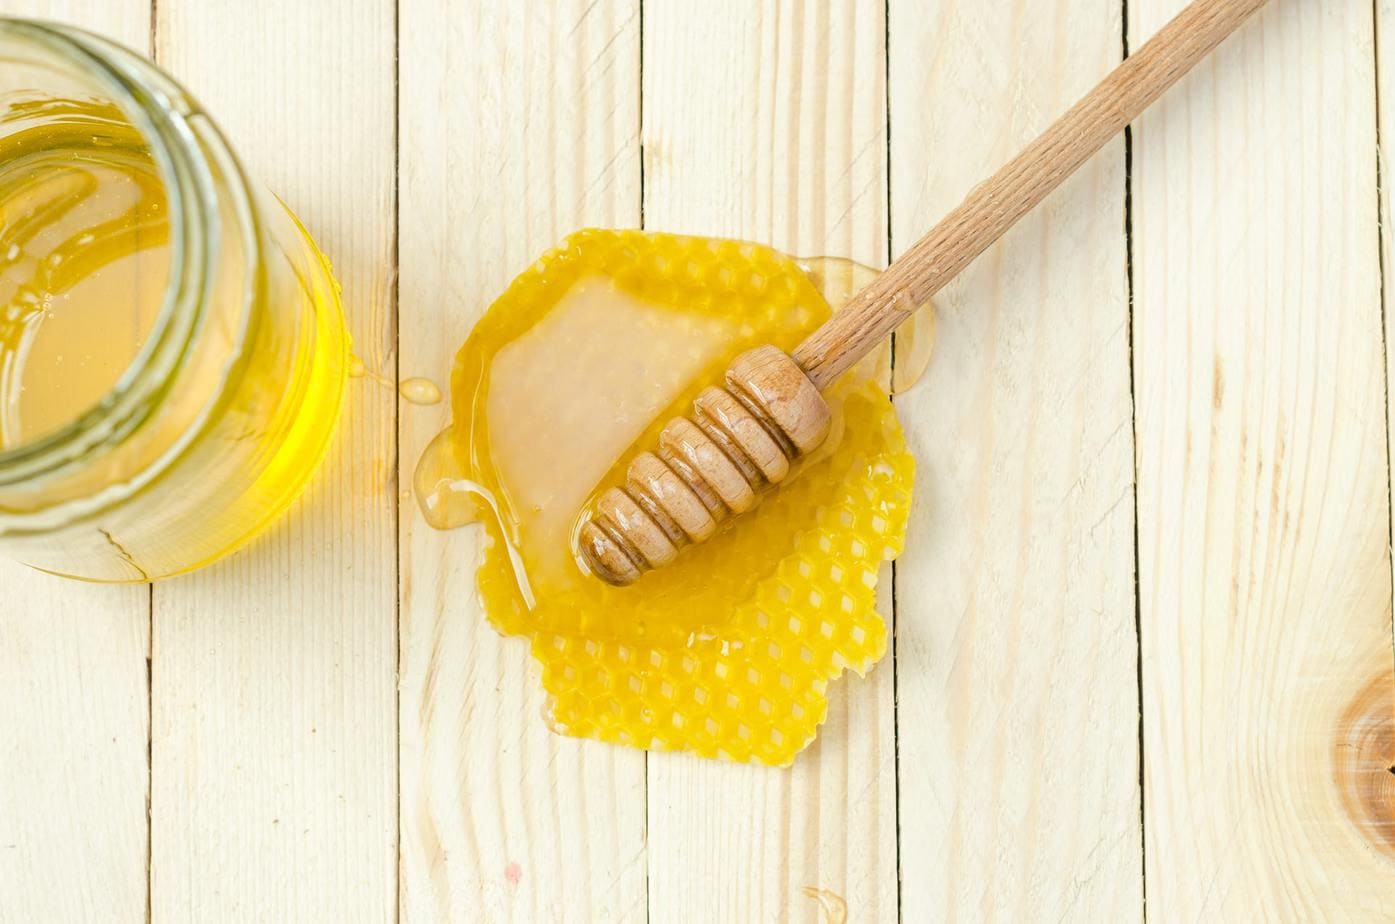 Manuka honey. What good for our skin is hidden under this name?